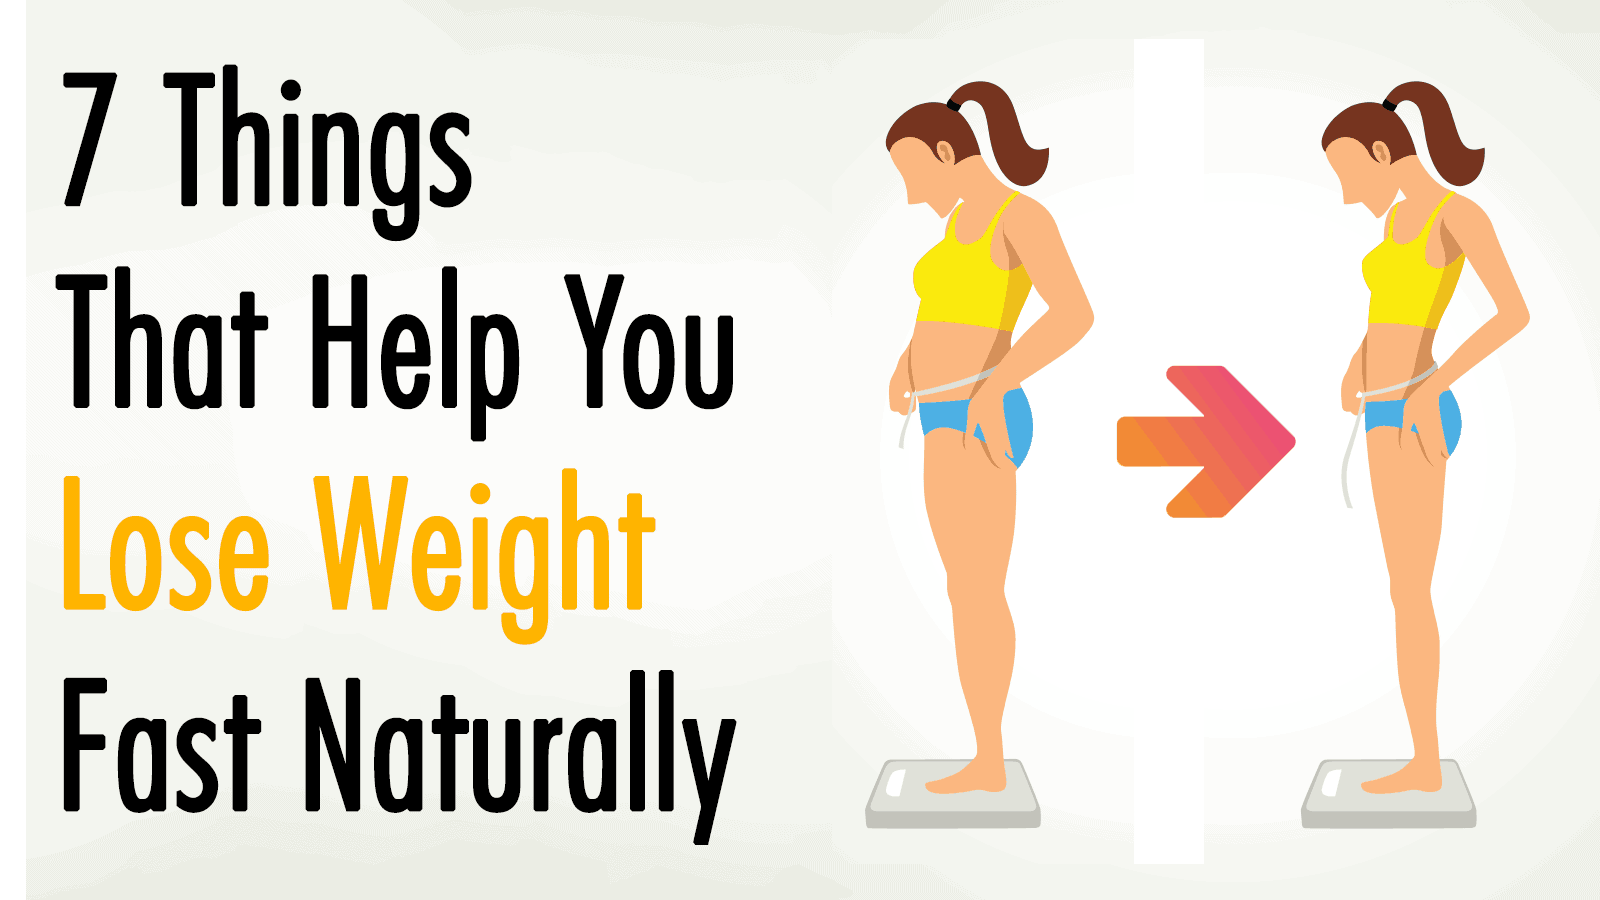 How to Lose Weight Fast: 11 Simple Steps, Based on Science